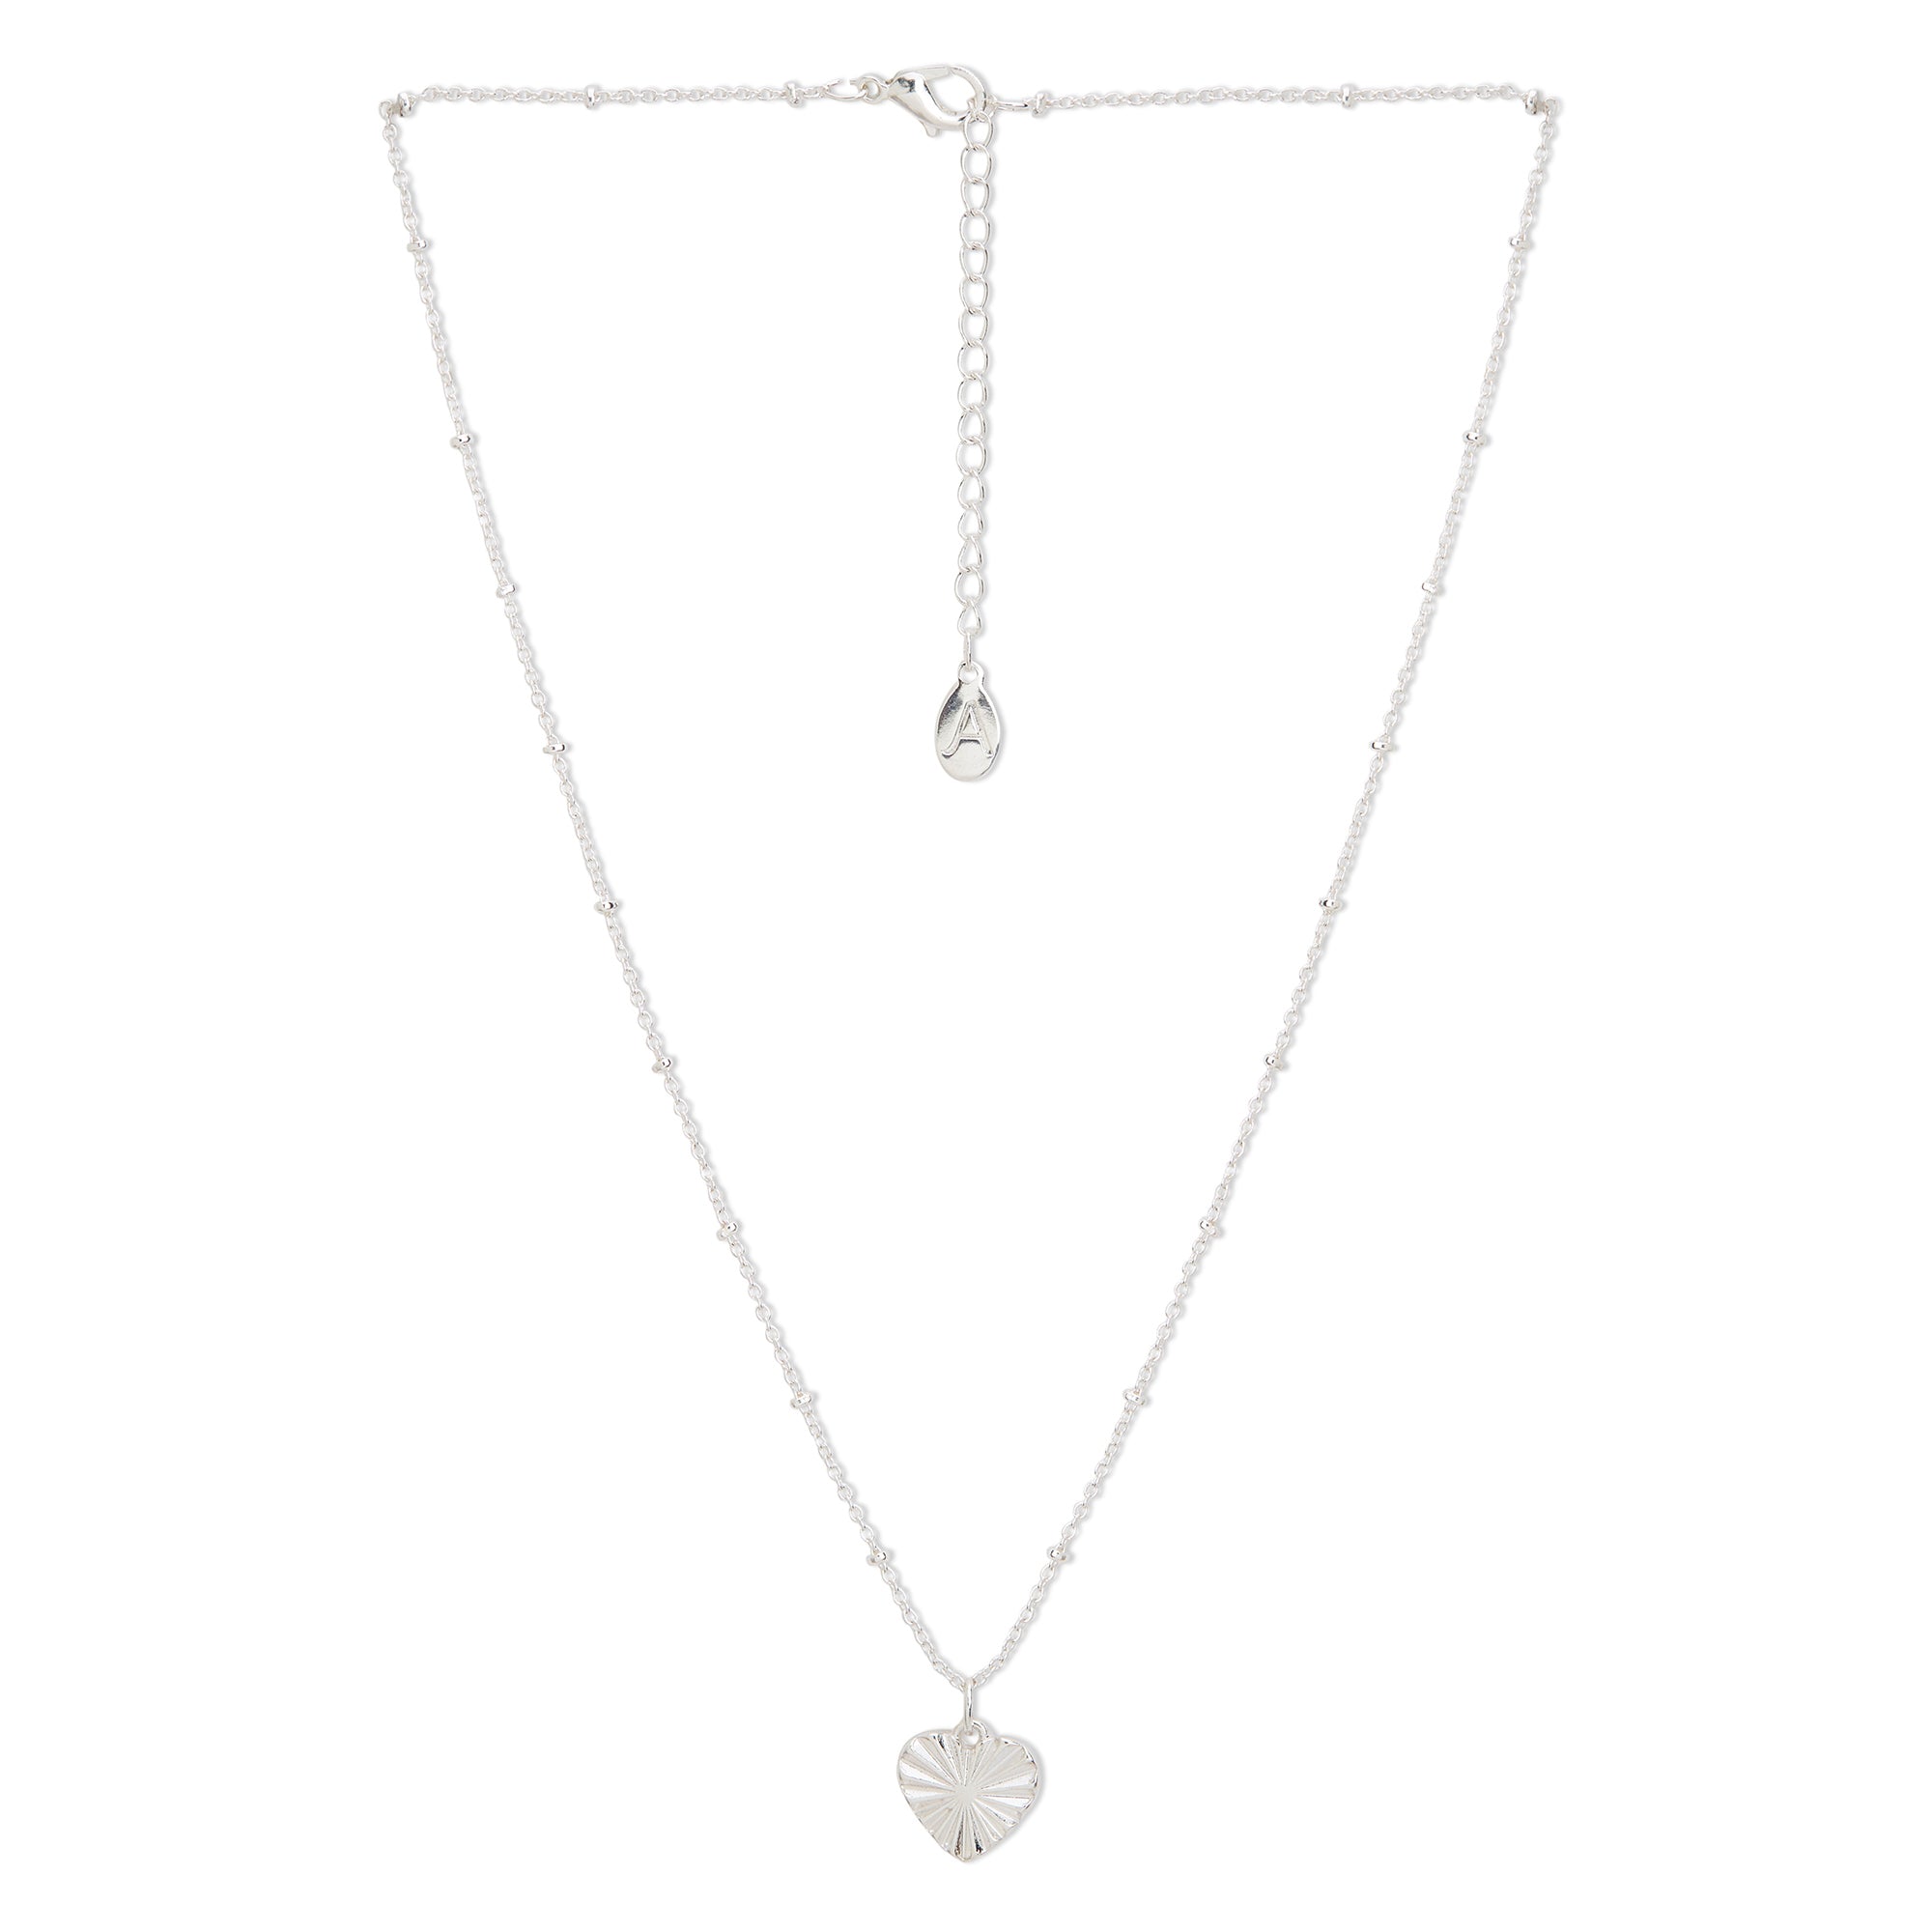 Buy Silver Solid Heart Pendant Necklace Online - Accessorize India